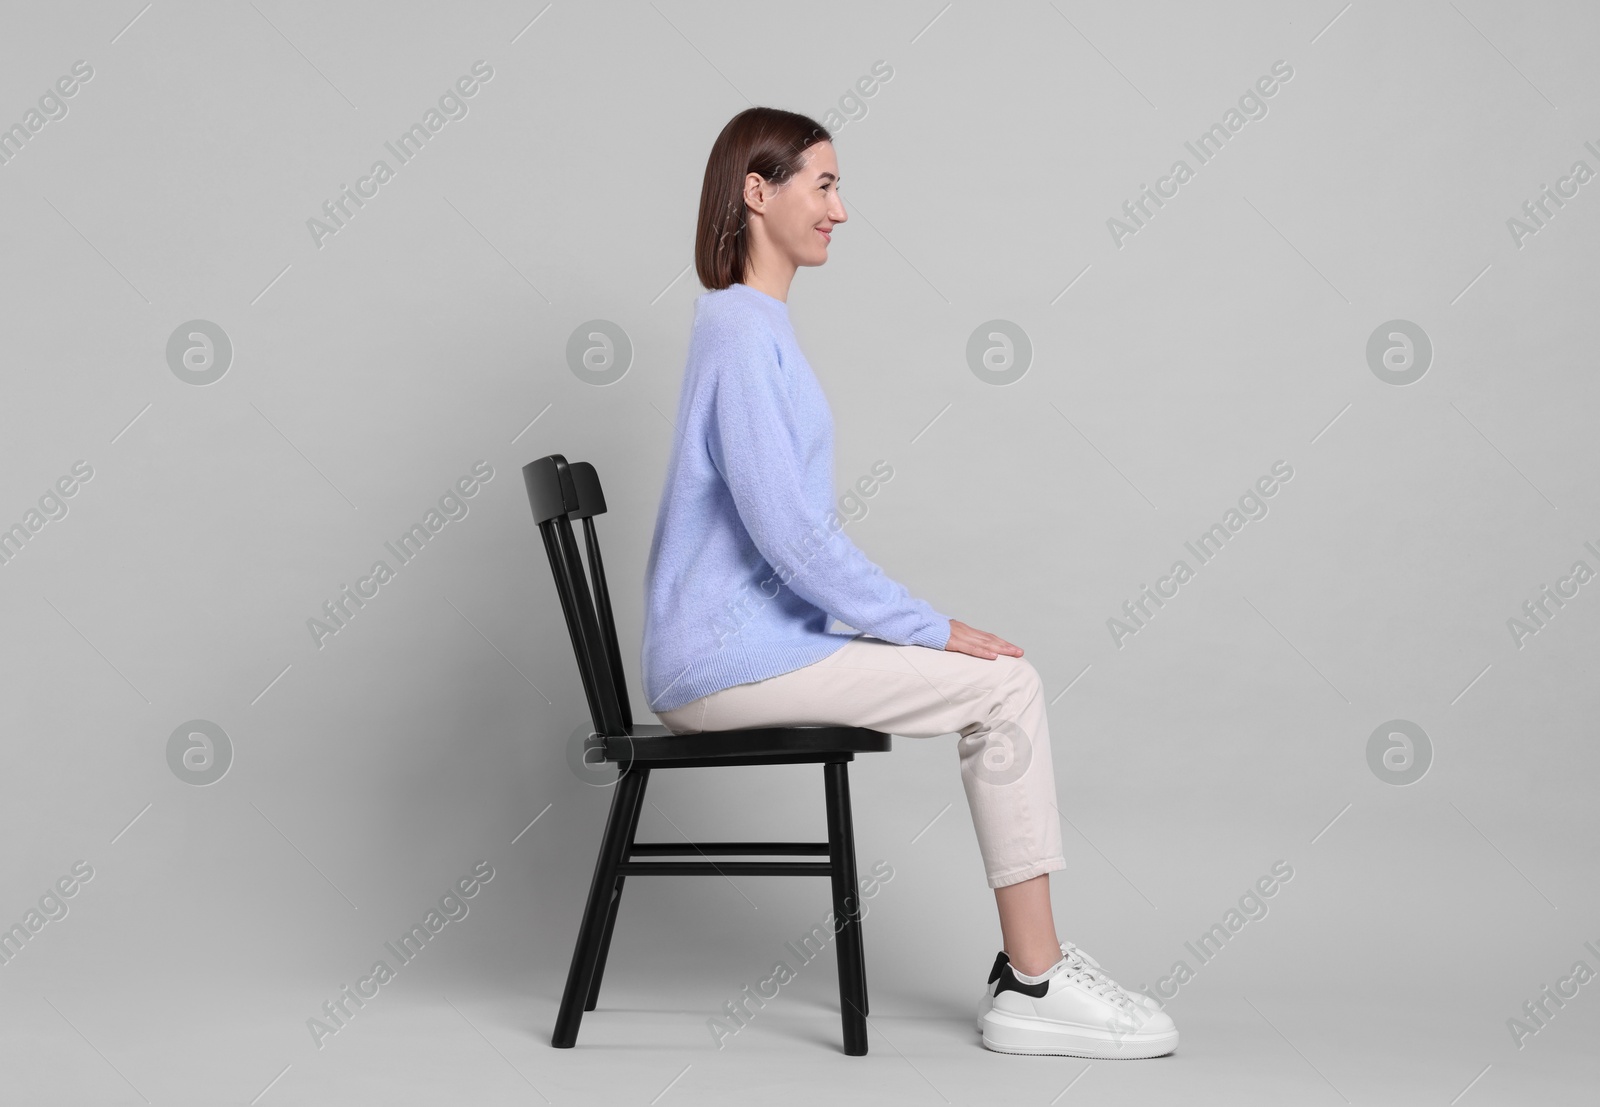 Photo of Woman with good posture sitting on chair against gray background